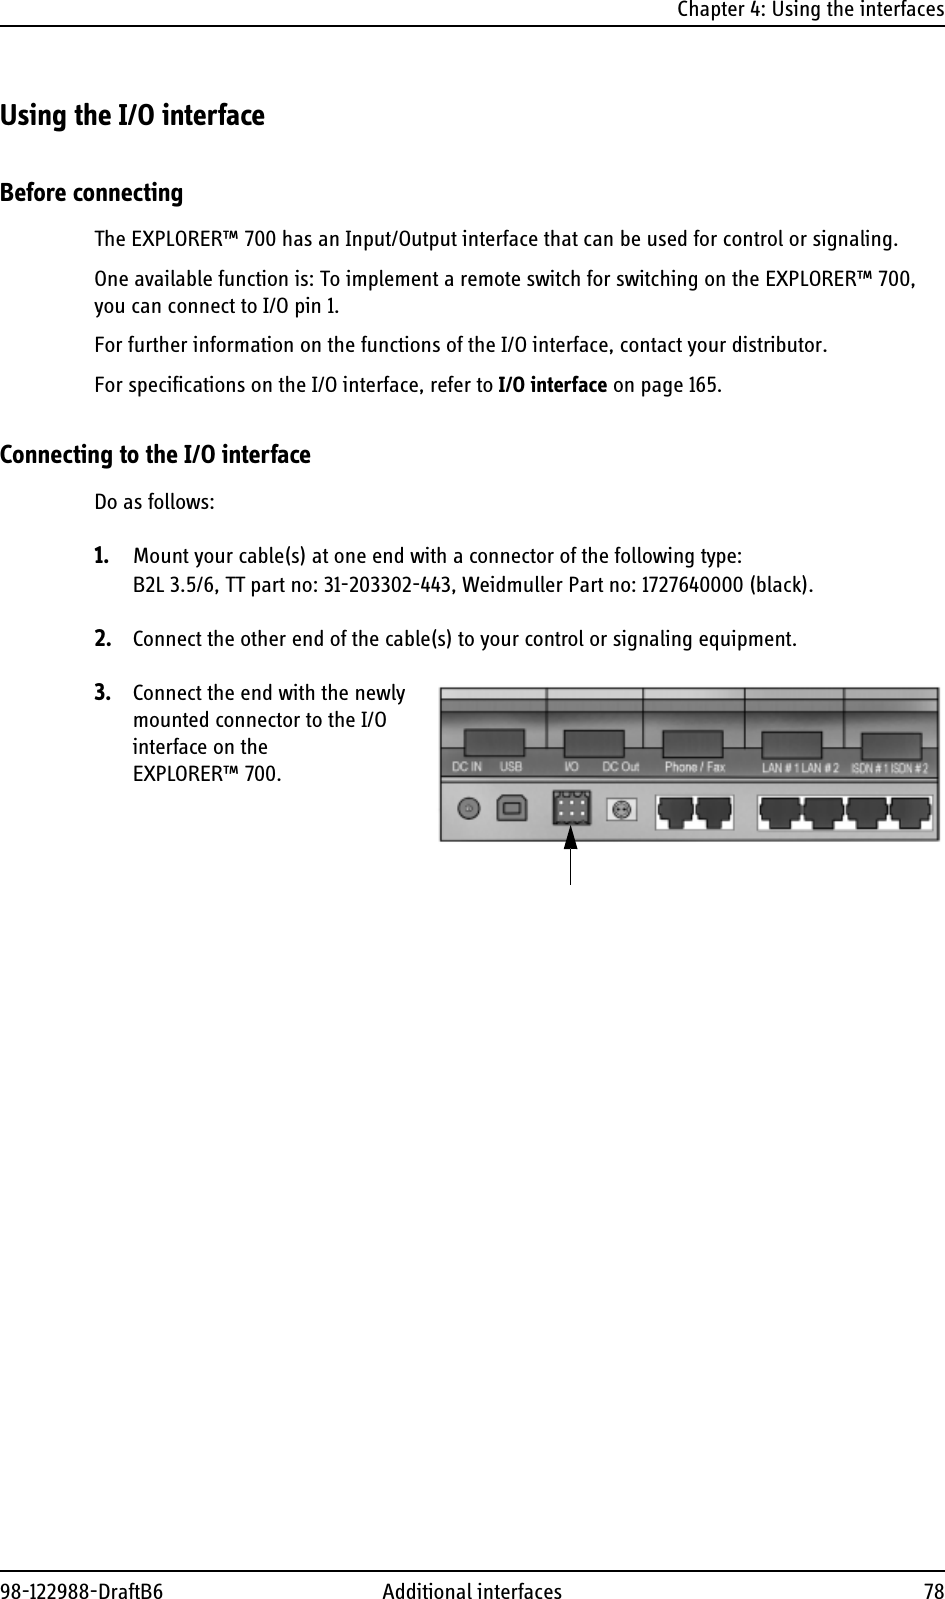 Chapter 4: Using the interfaces98-122988-DraftB6 Additional interfaces 78Using the I/O interfaceBefore connectingThe EXPLORER™ 700 has an Input/Output interface that can be used for control or signaling.One available function is: To implement a remote switch for switching on the EXPLORER™ 700, you can connect to I/O pin 1.For further information on the functions of the I/O interface, contact your distributor.For specifications on the I/O interface, refer to I/O interface on page 165.Connecting to the I/O interfaceDo as follows:1. Mount your cable(s) at one end with a connector of the following type:B2L 3.5/6, TT part no: 31-203302-443, Weidmuller Part no: 1727640000 (black).2. Connect the other end of the cable(s) to your control or signaling equipment.3. Connect the end with the newly mounted connector to the I/O interface on the EXPLORER™ 700.